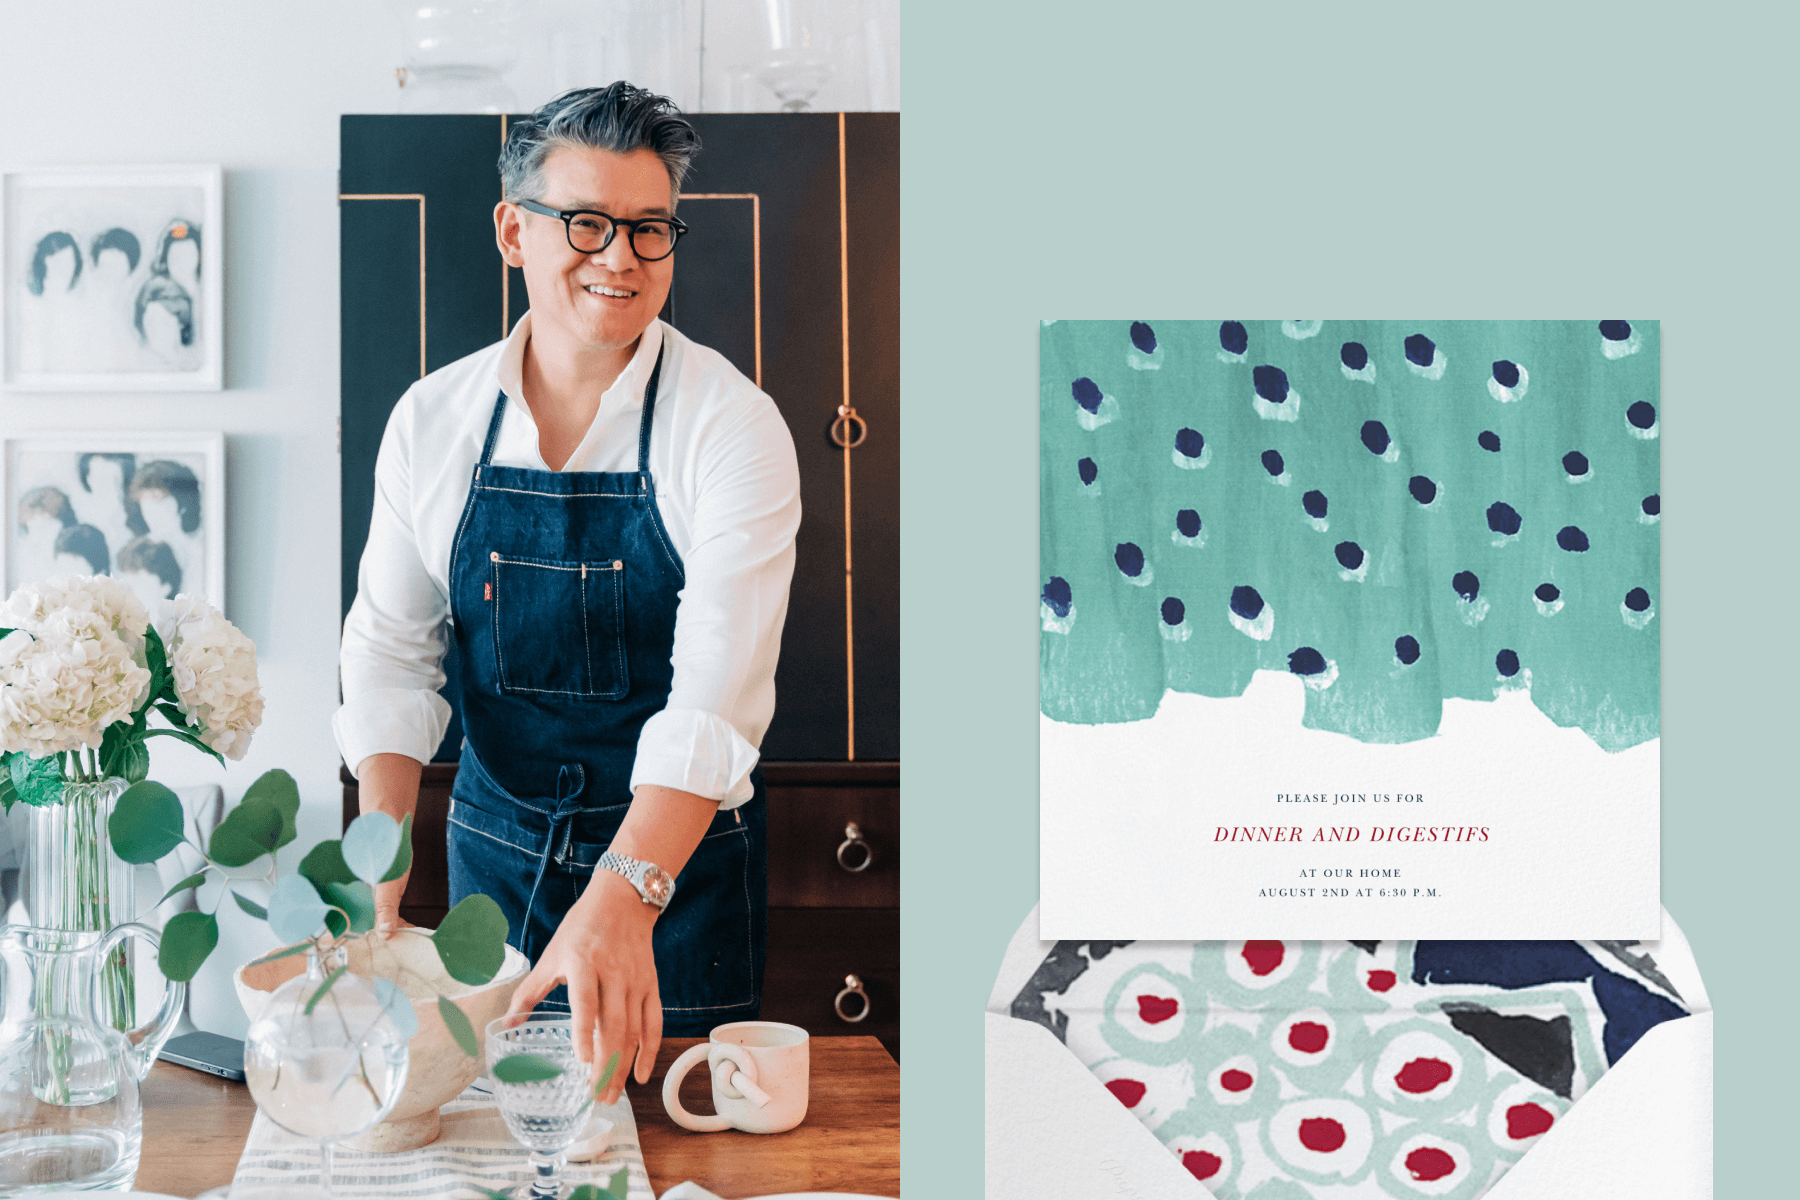 Left: Peter Som in his home putting a bowl on a table with flowers; Right: A dinner invitation featuring teal and blue dots.